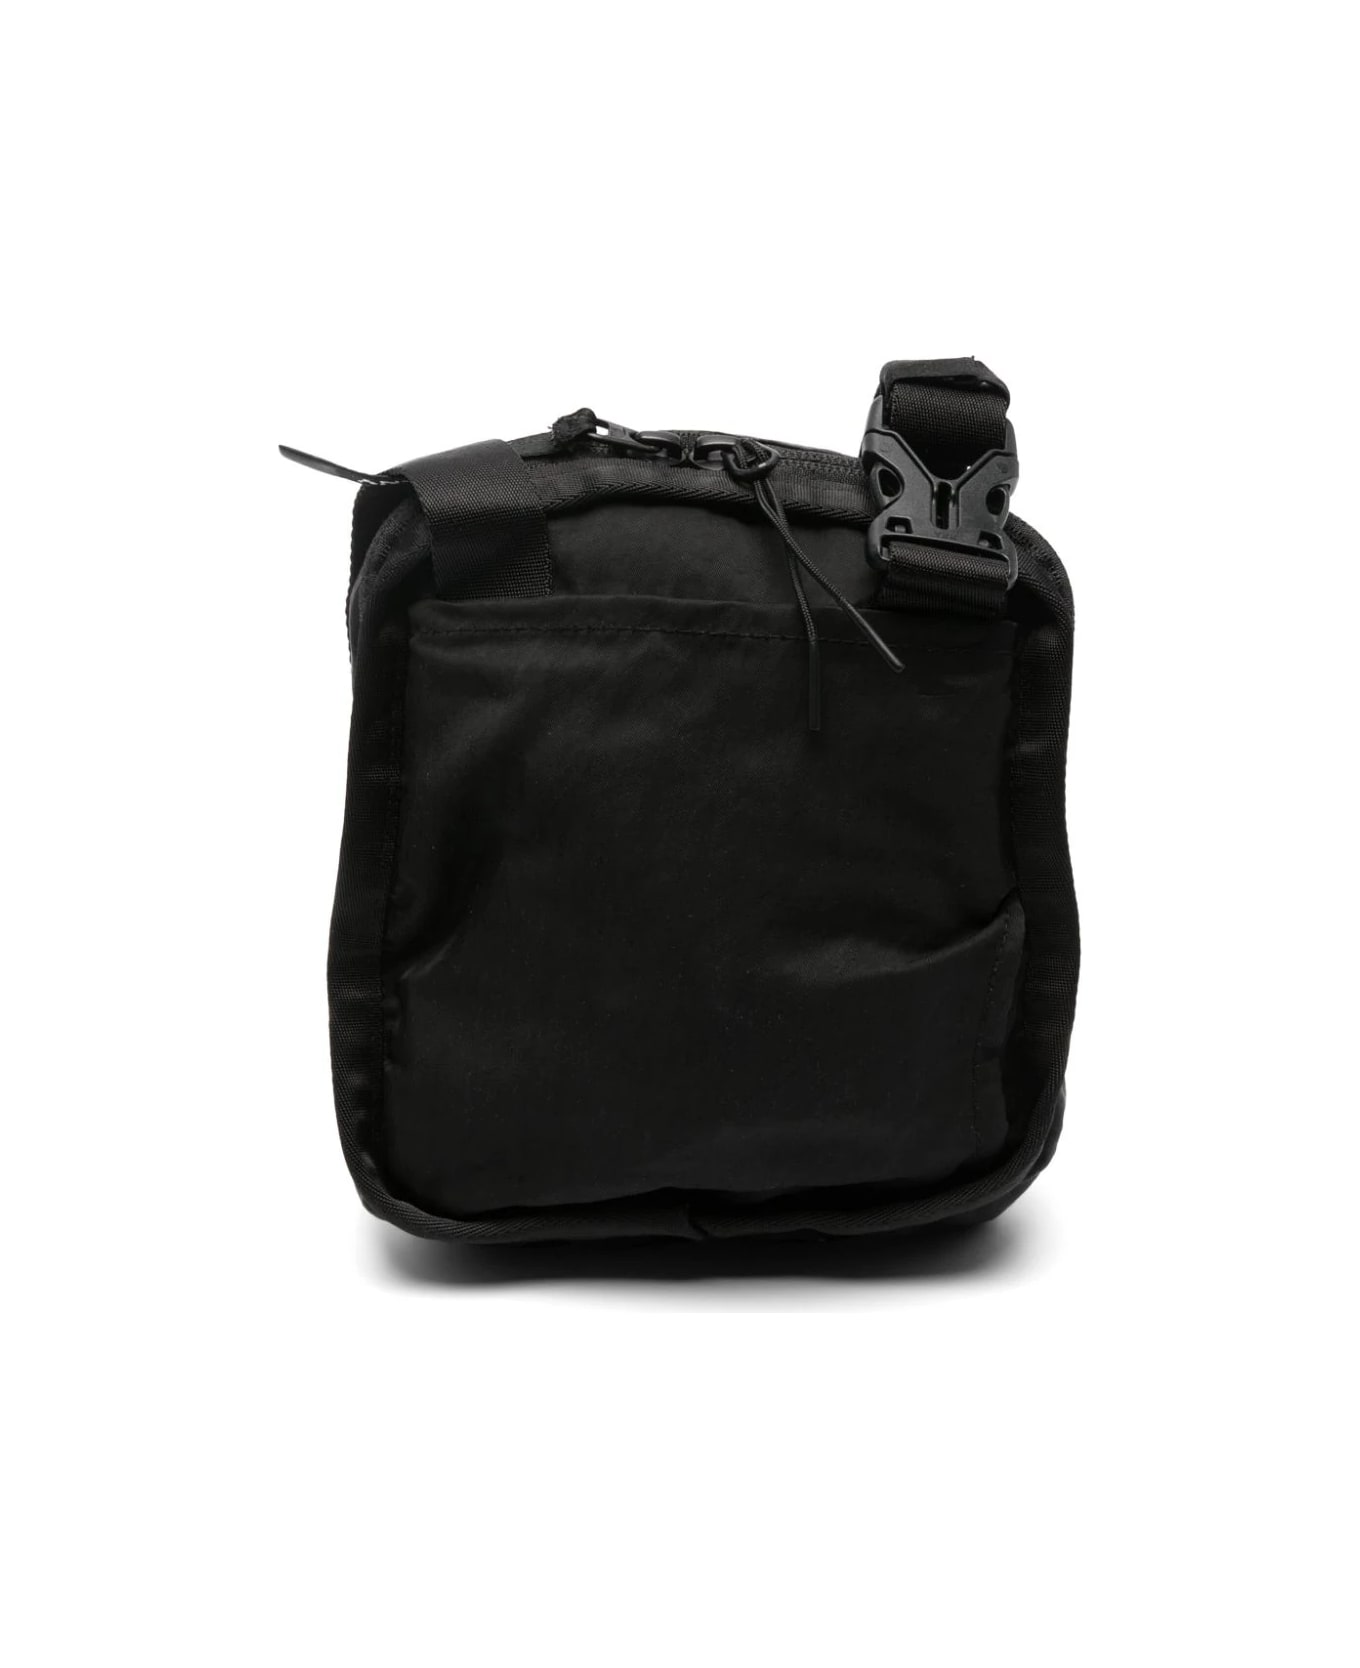 C.P. Company Undersixteen Shoulder Bag With Embroidery - Black